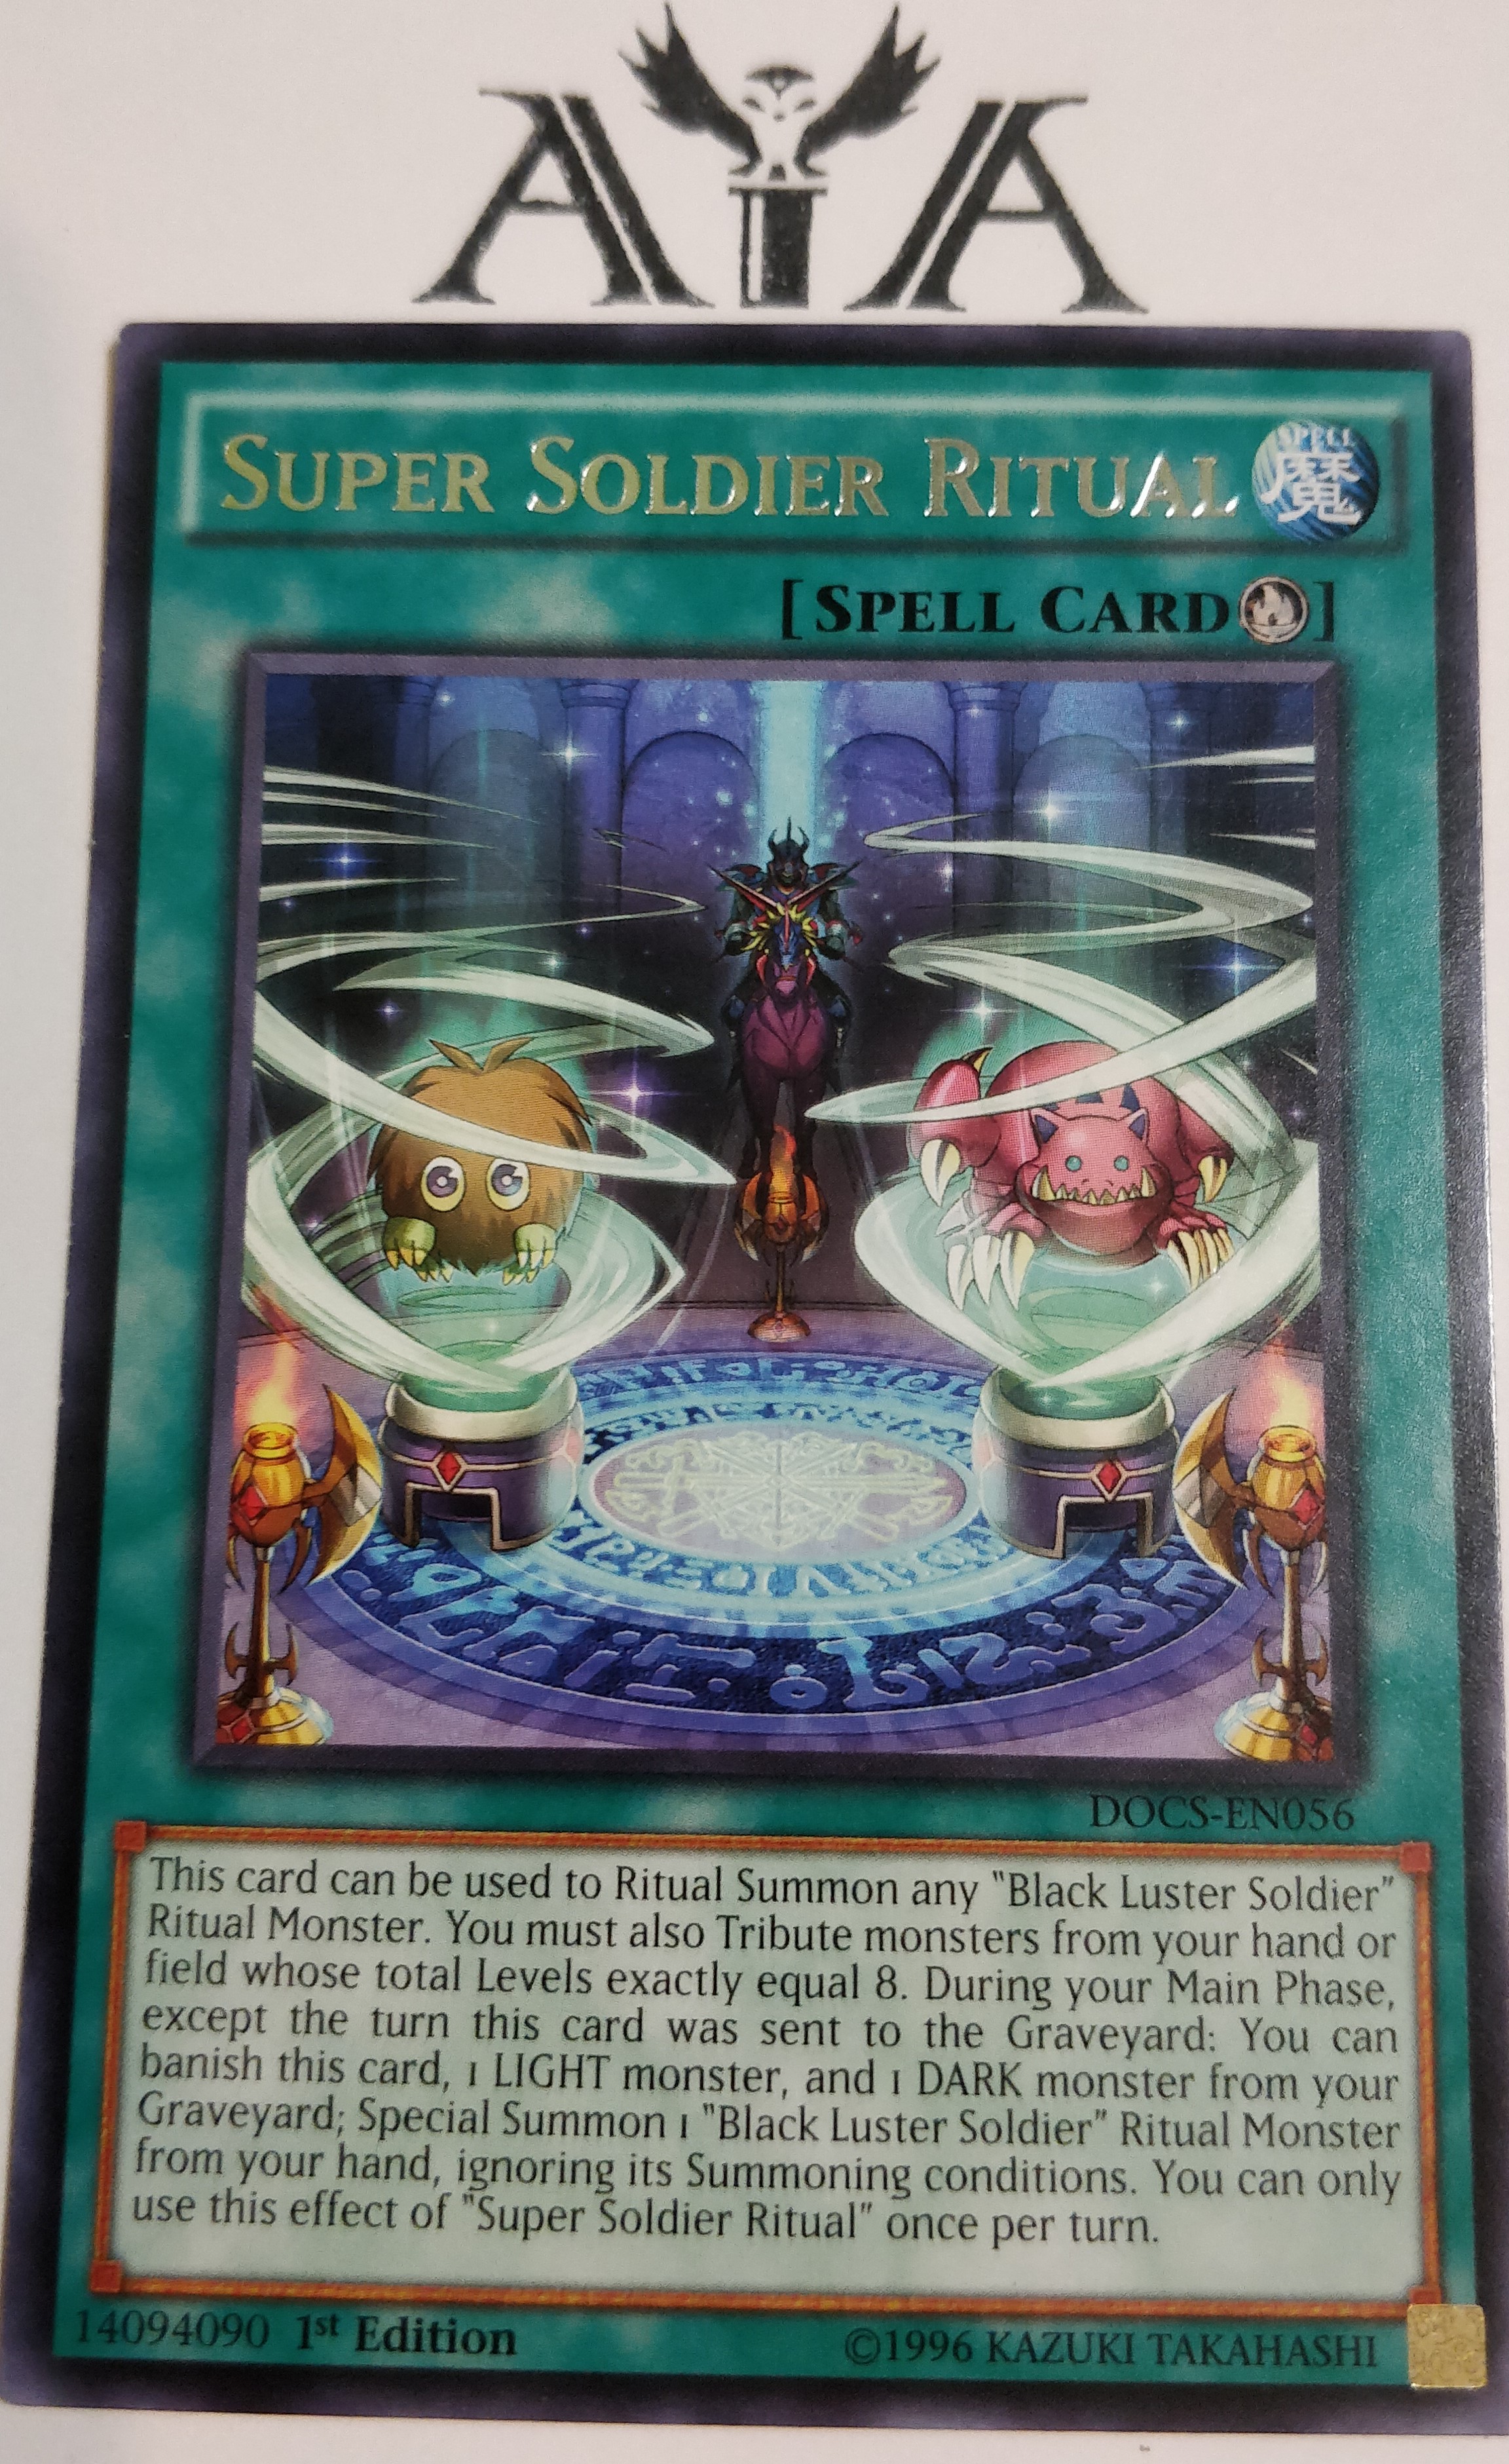 Psychic Blade DOCS-EN064 Common Yu-Gi-Oh Card 1st Edition New